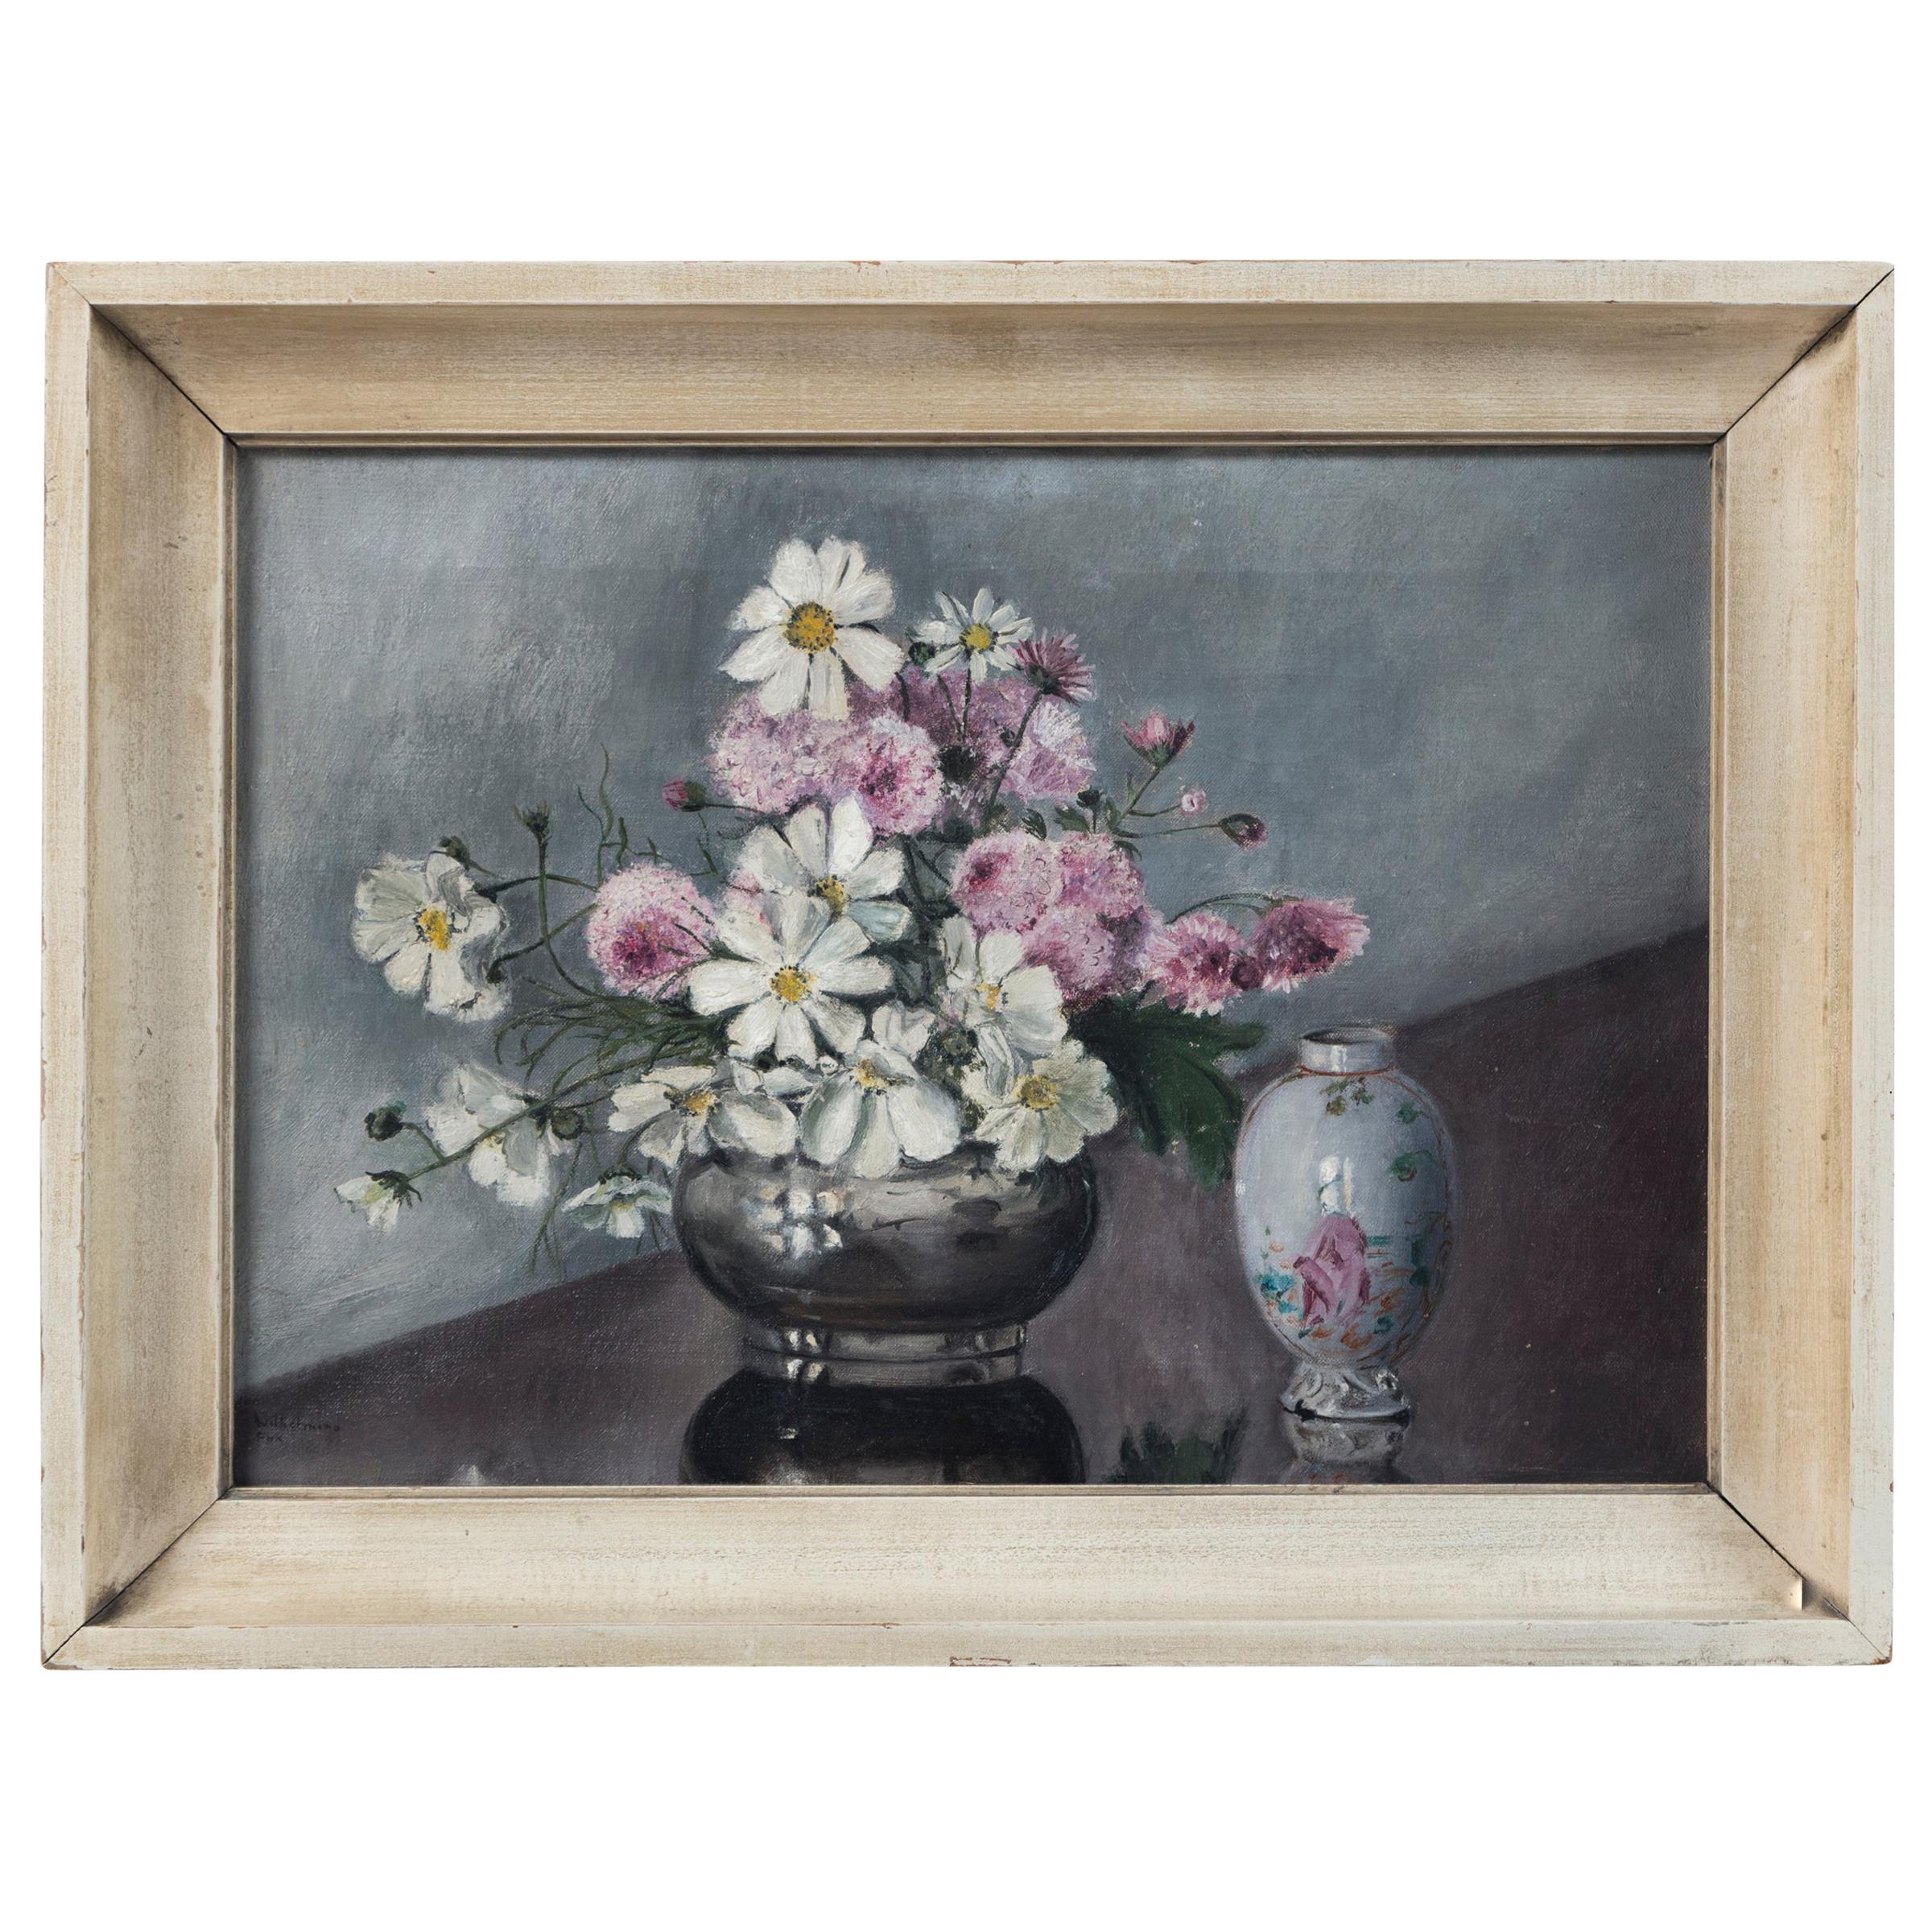 Folk Art Still Life, 'Flowers and Chinese Export Porcelain', Early 20th Century